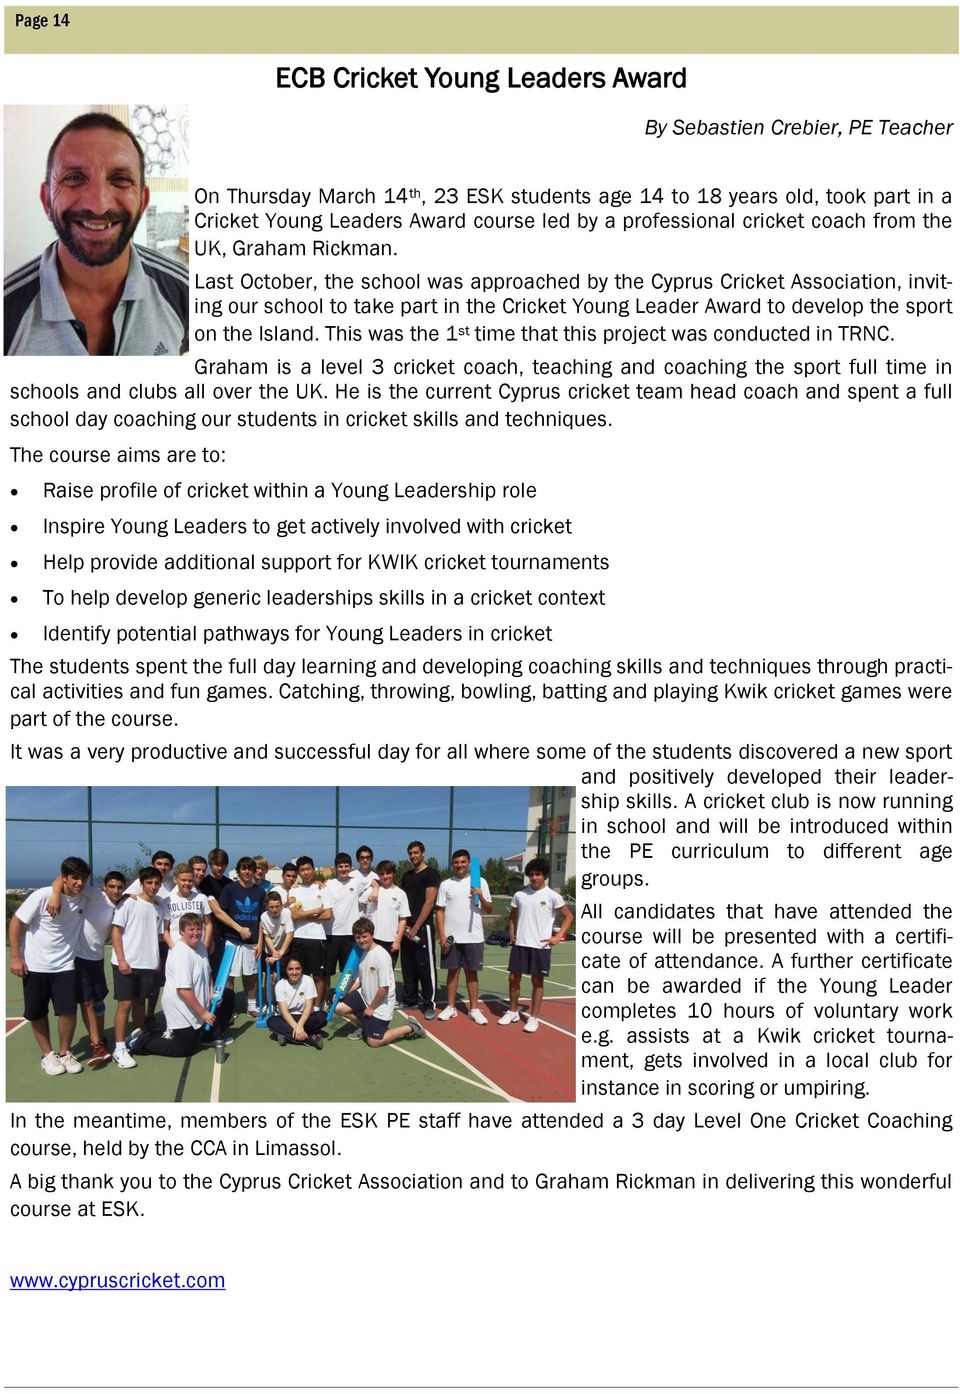 Last October, the school was approached by the Cyprus Cricket Association, inviting our school to take part in the Cricket Young Leader Award to develop the sport on the Island.